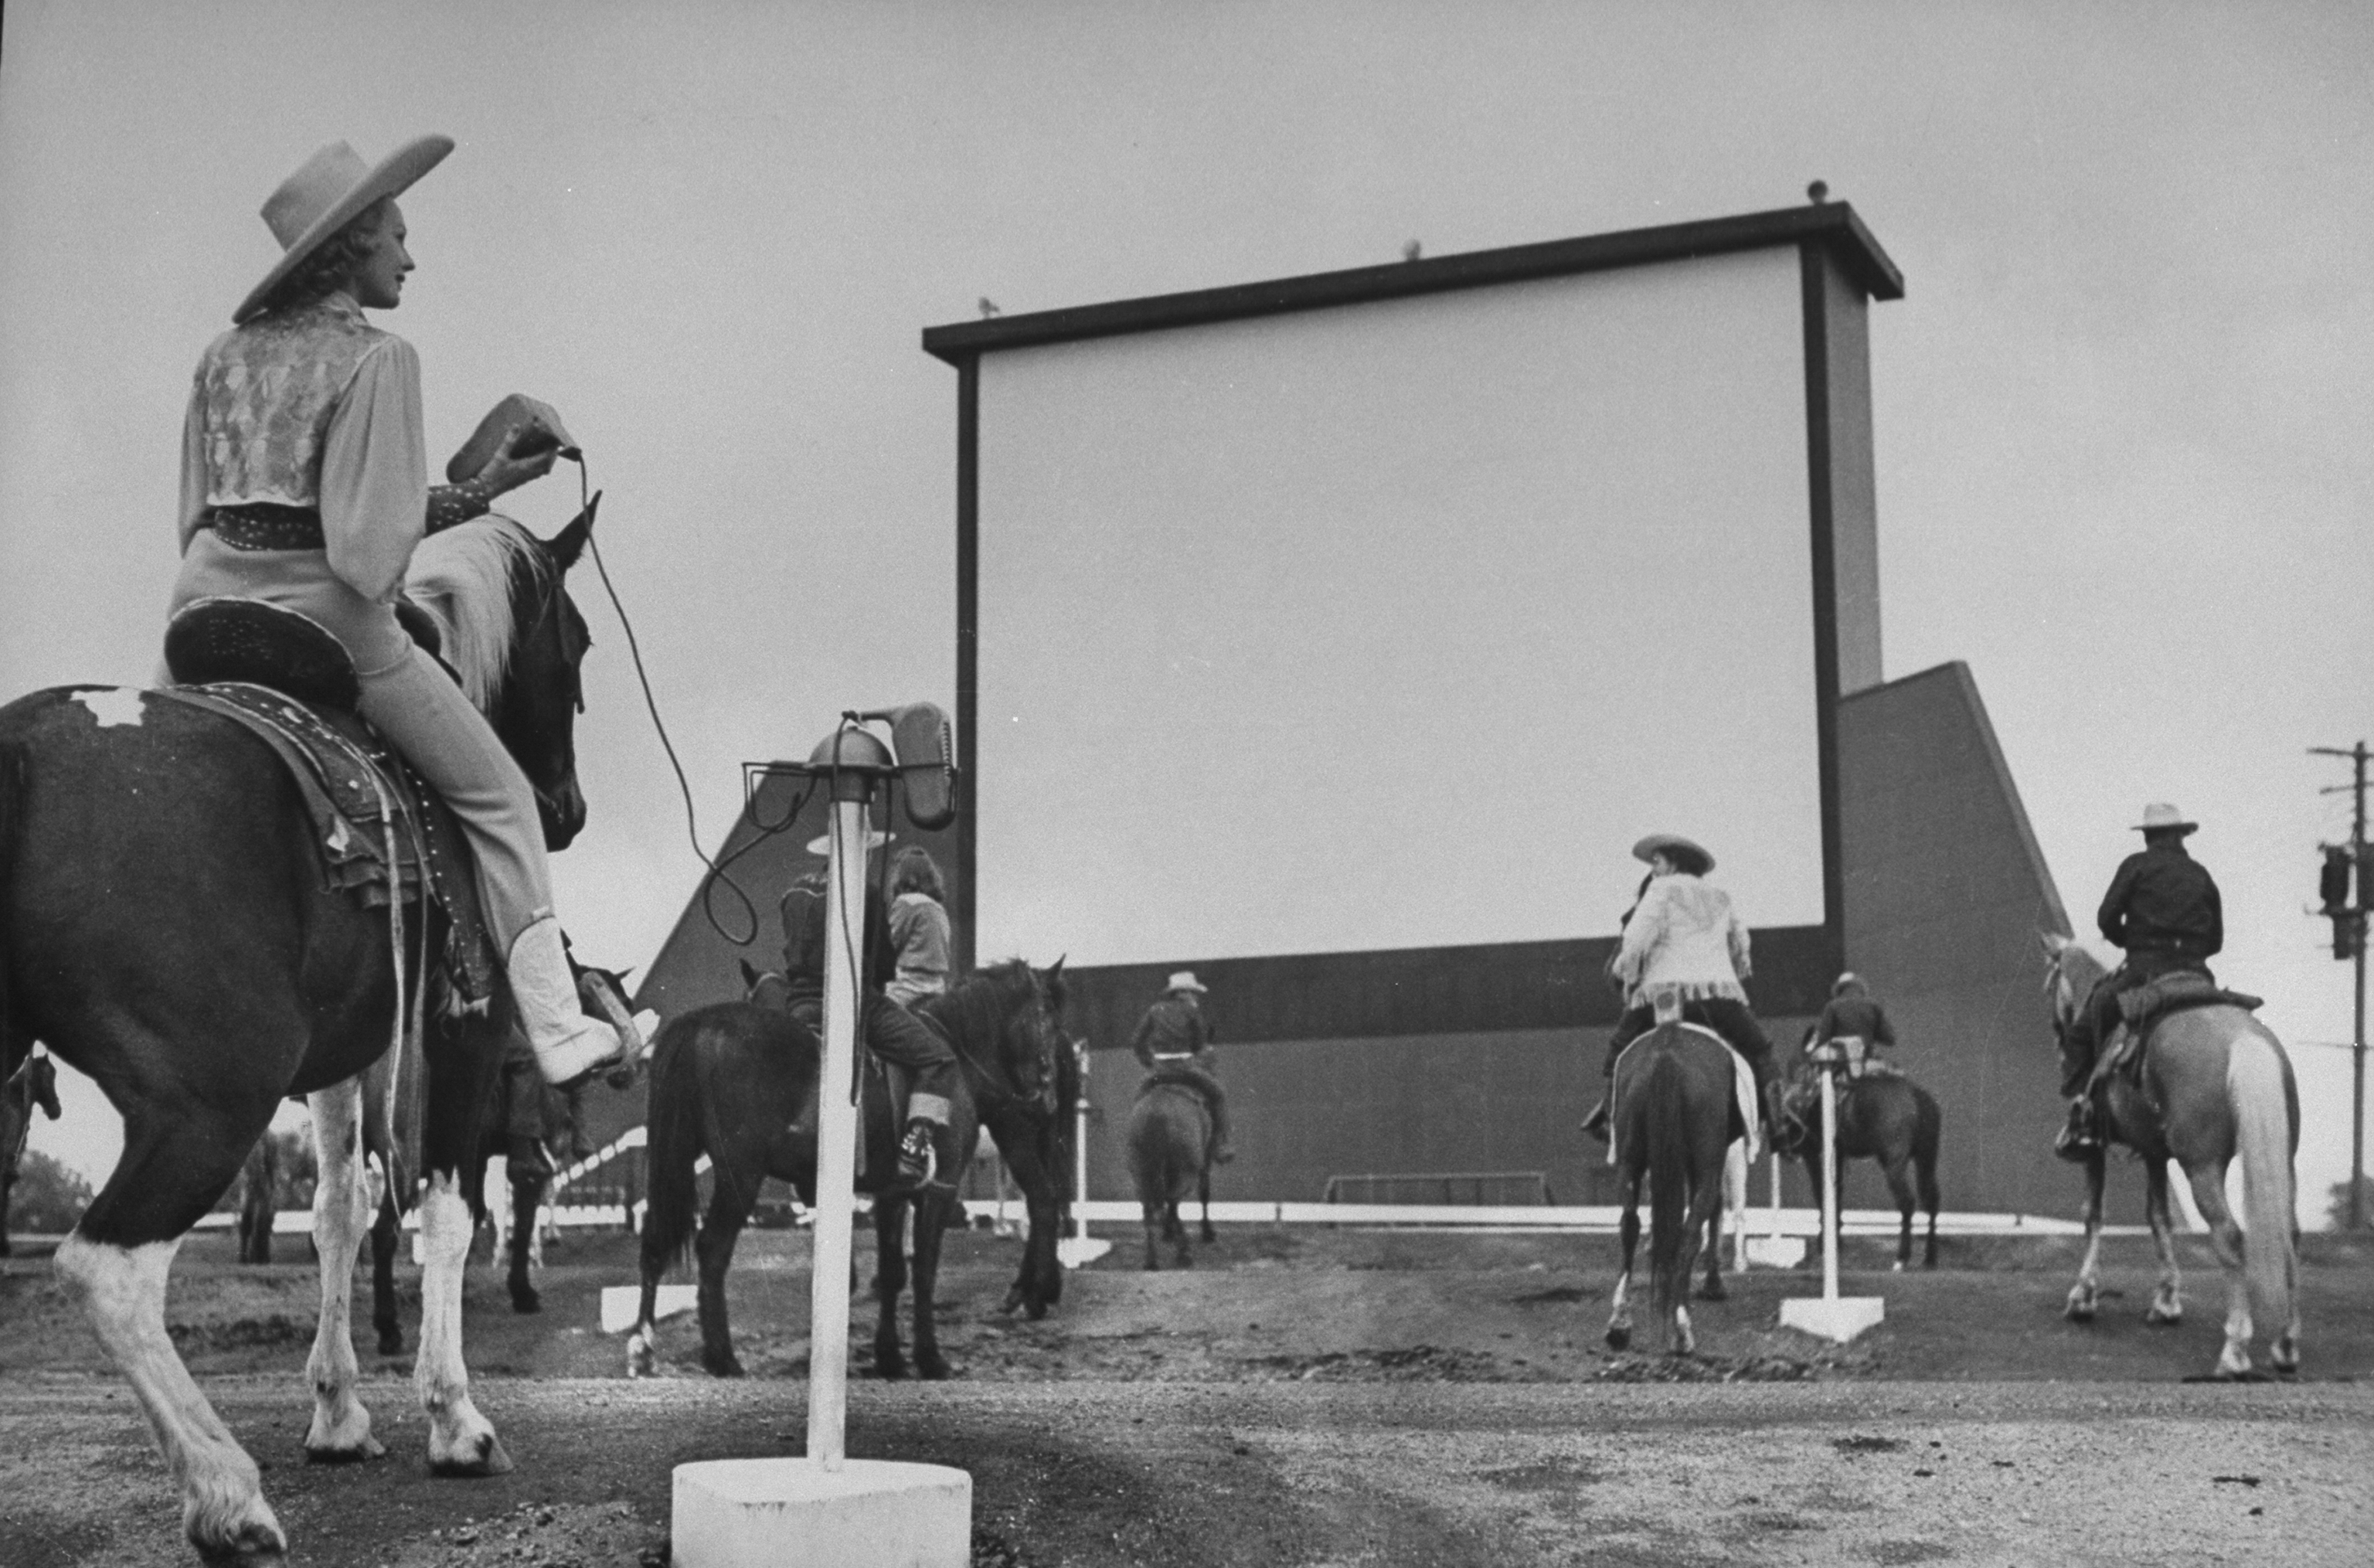 Horseback riders in cowboy garb, taking positions at speaker posts while settling in to watch the evening's feature at a Drive-In movie theater.  (Photo by Carl Iwasaki/The LIFE Images Collection/Getty Images)